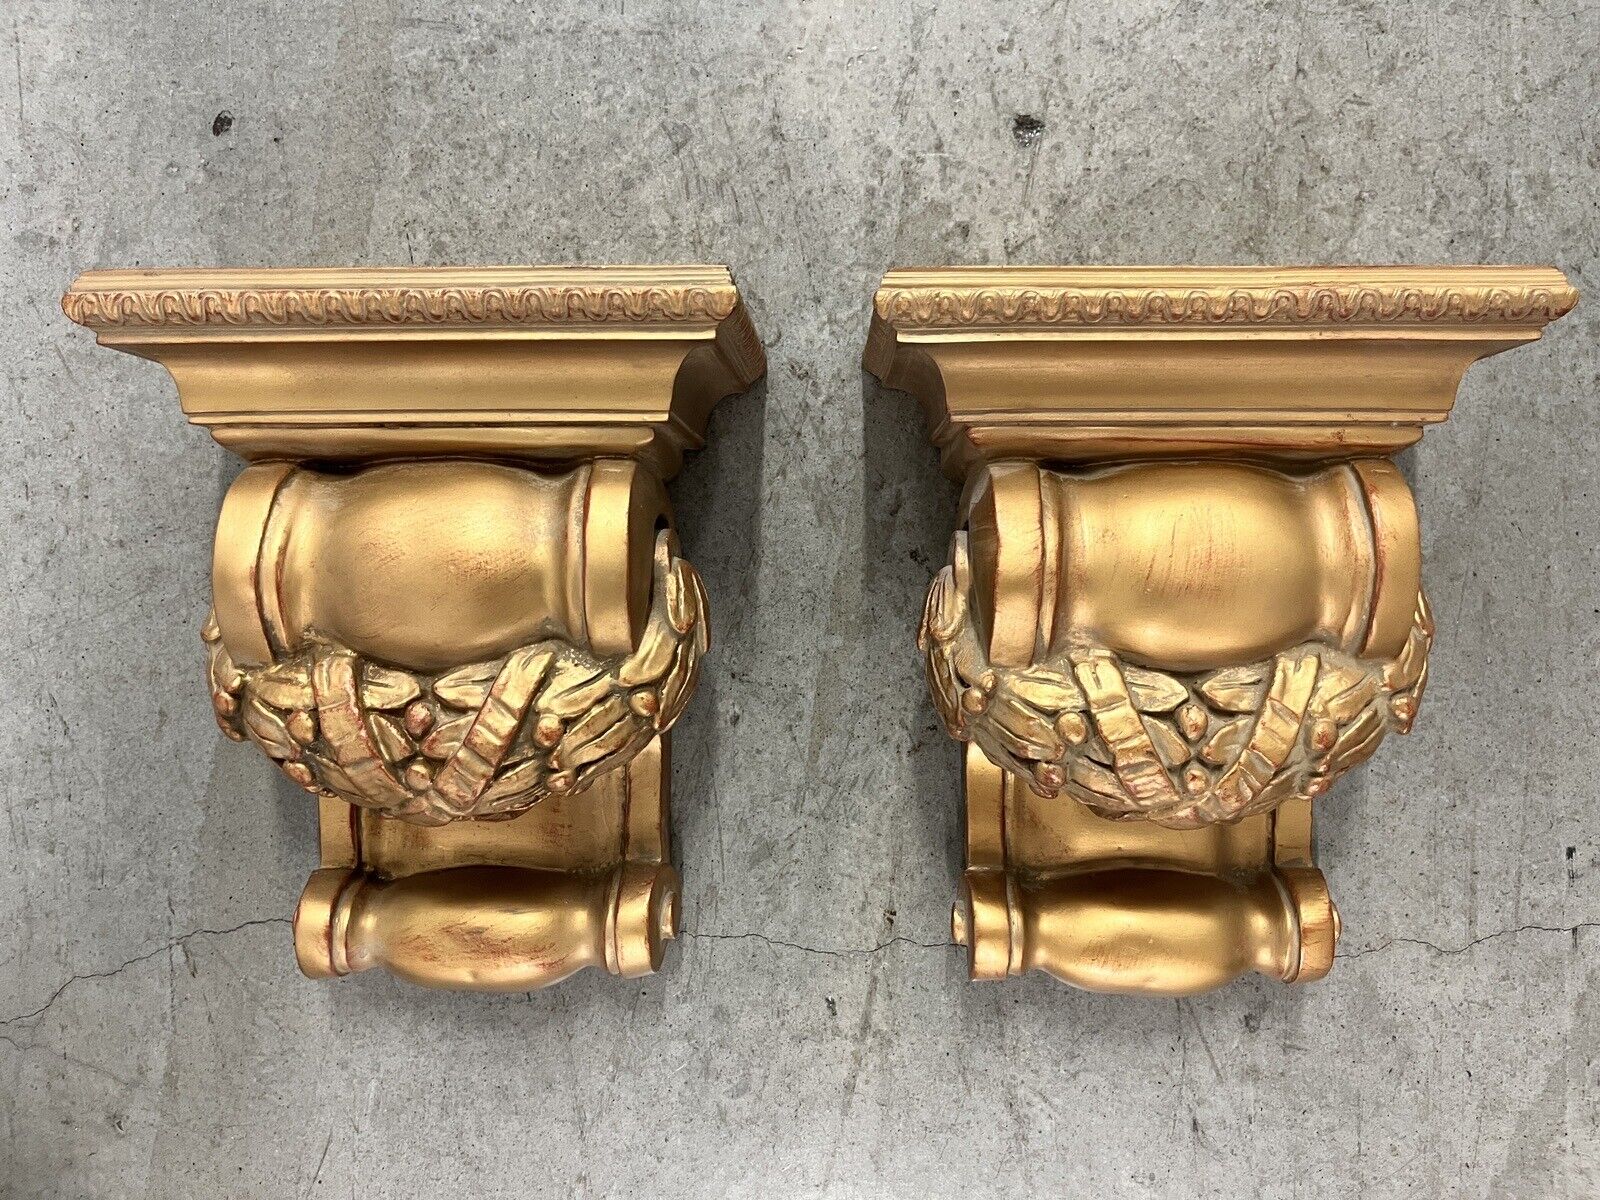 Pair of Decorative Gold Wall Shelves